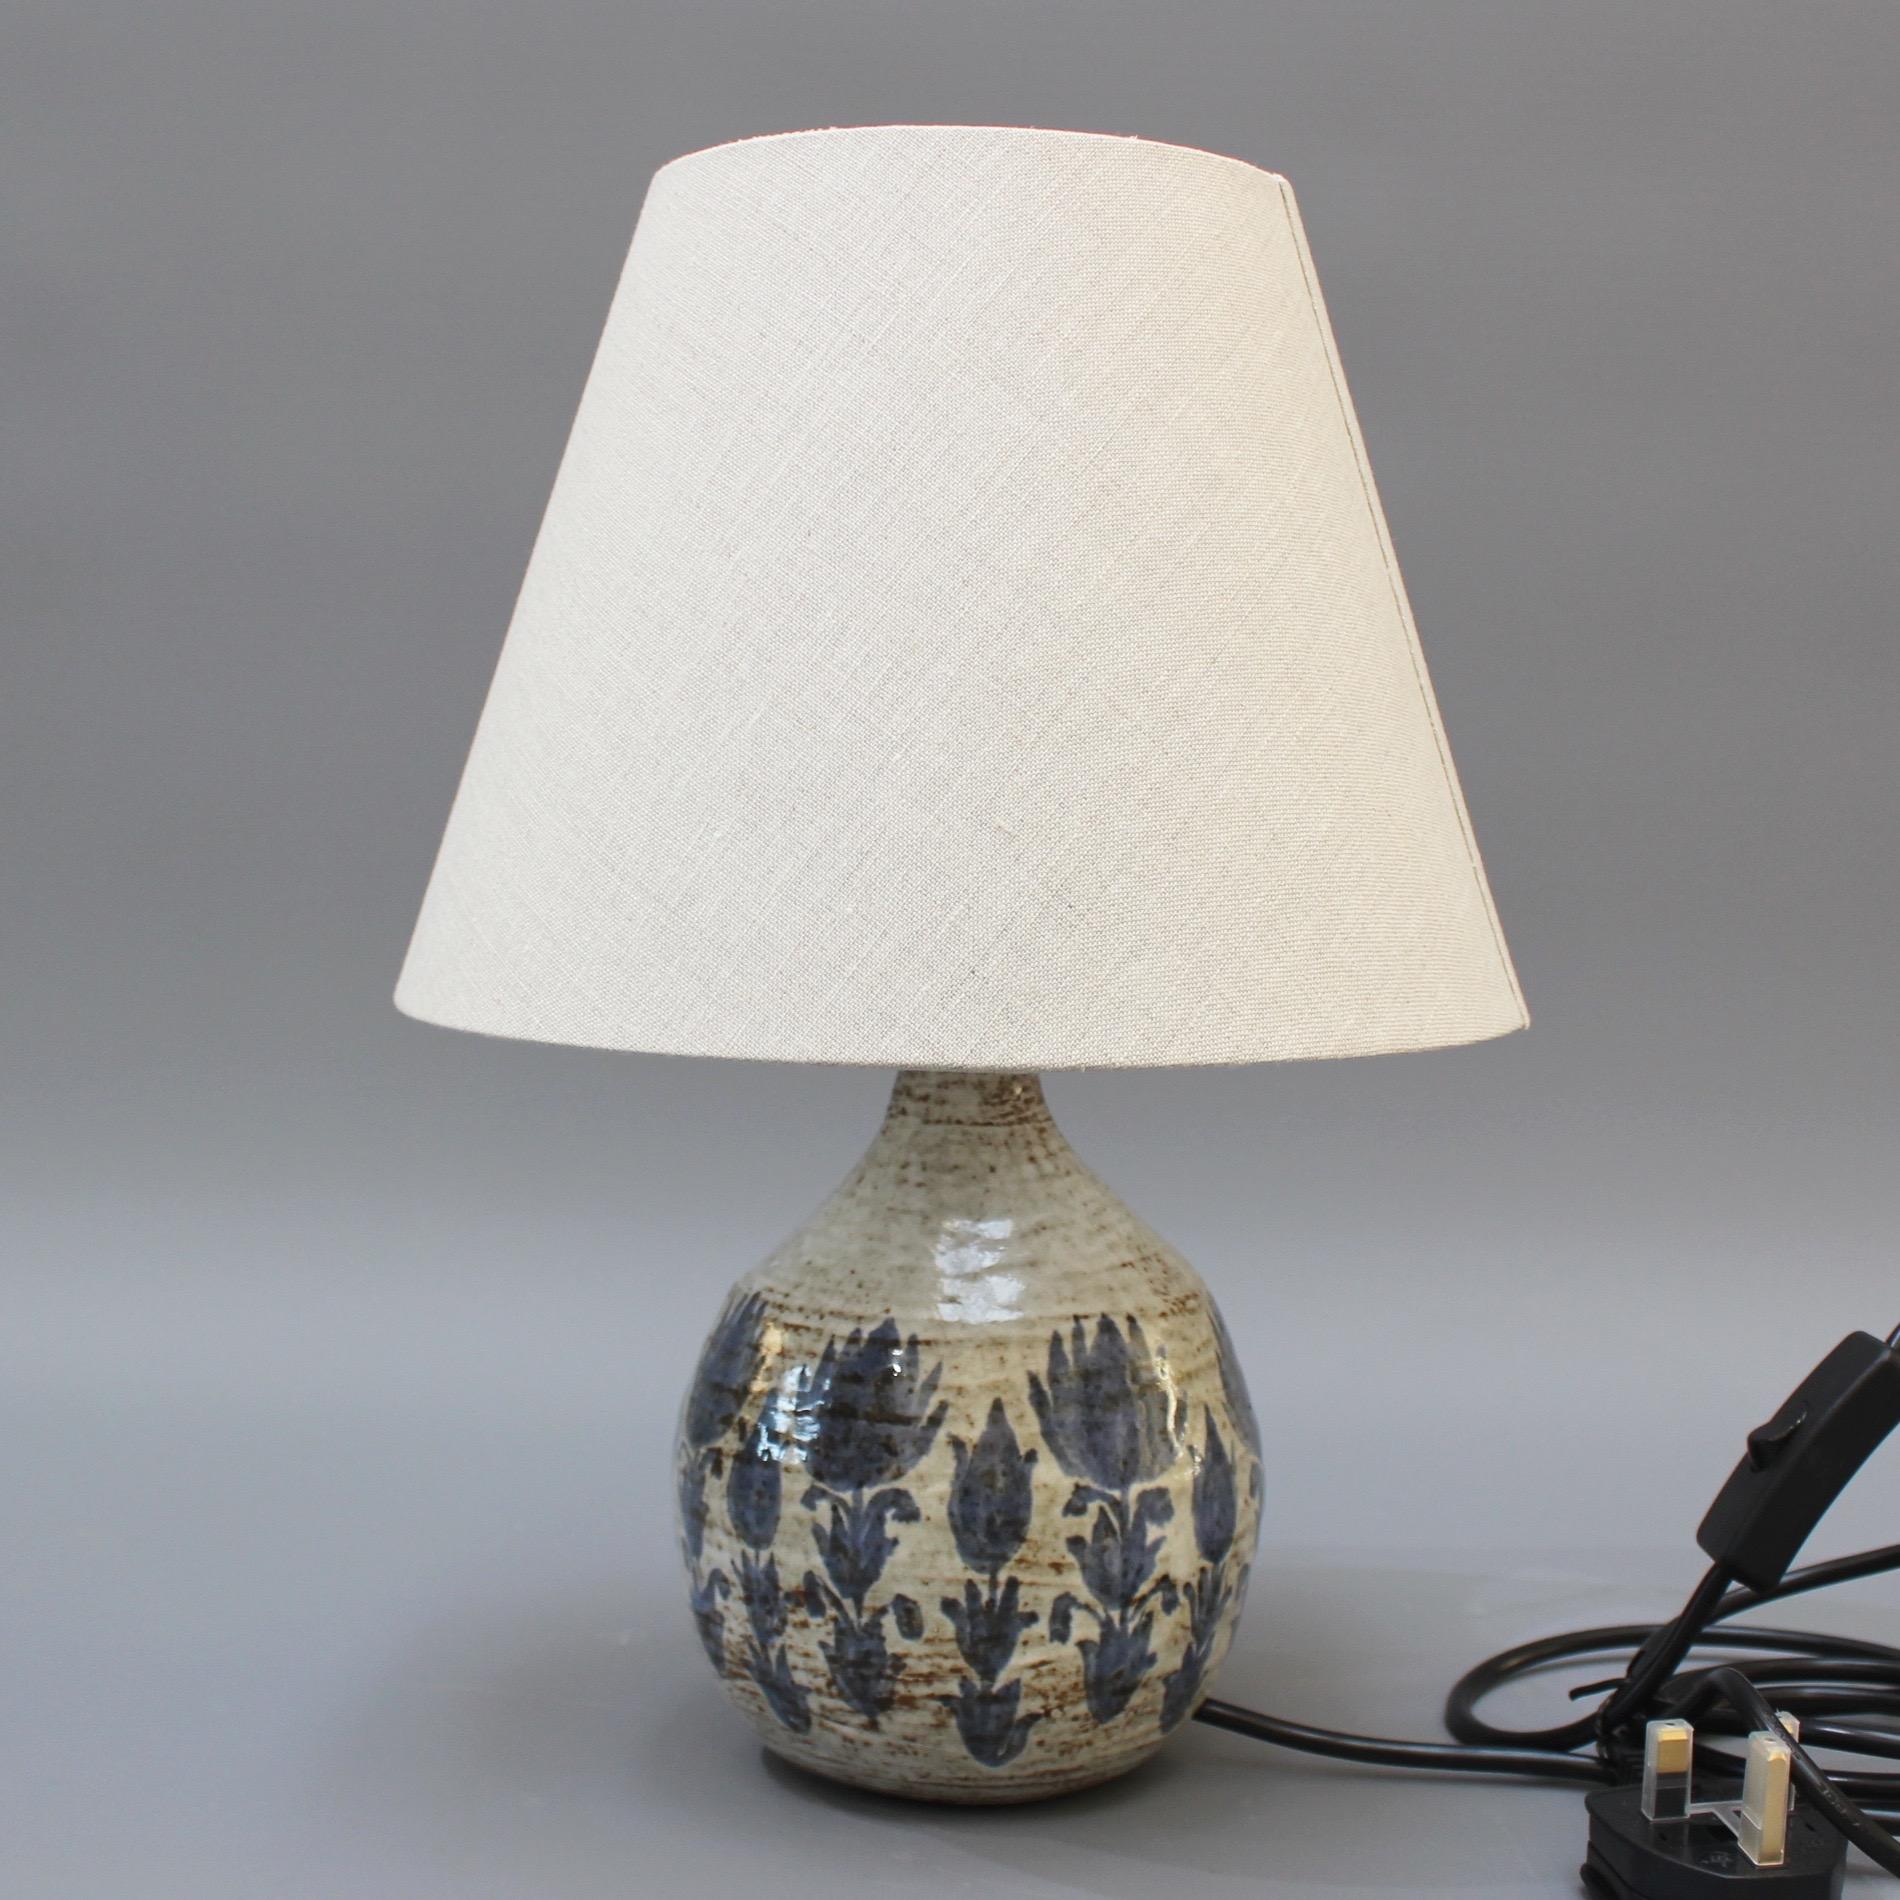 French Midcentury Ceramic Table Lamp with Blue Flower Motif, circa 1960s